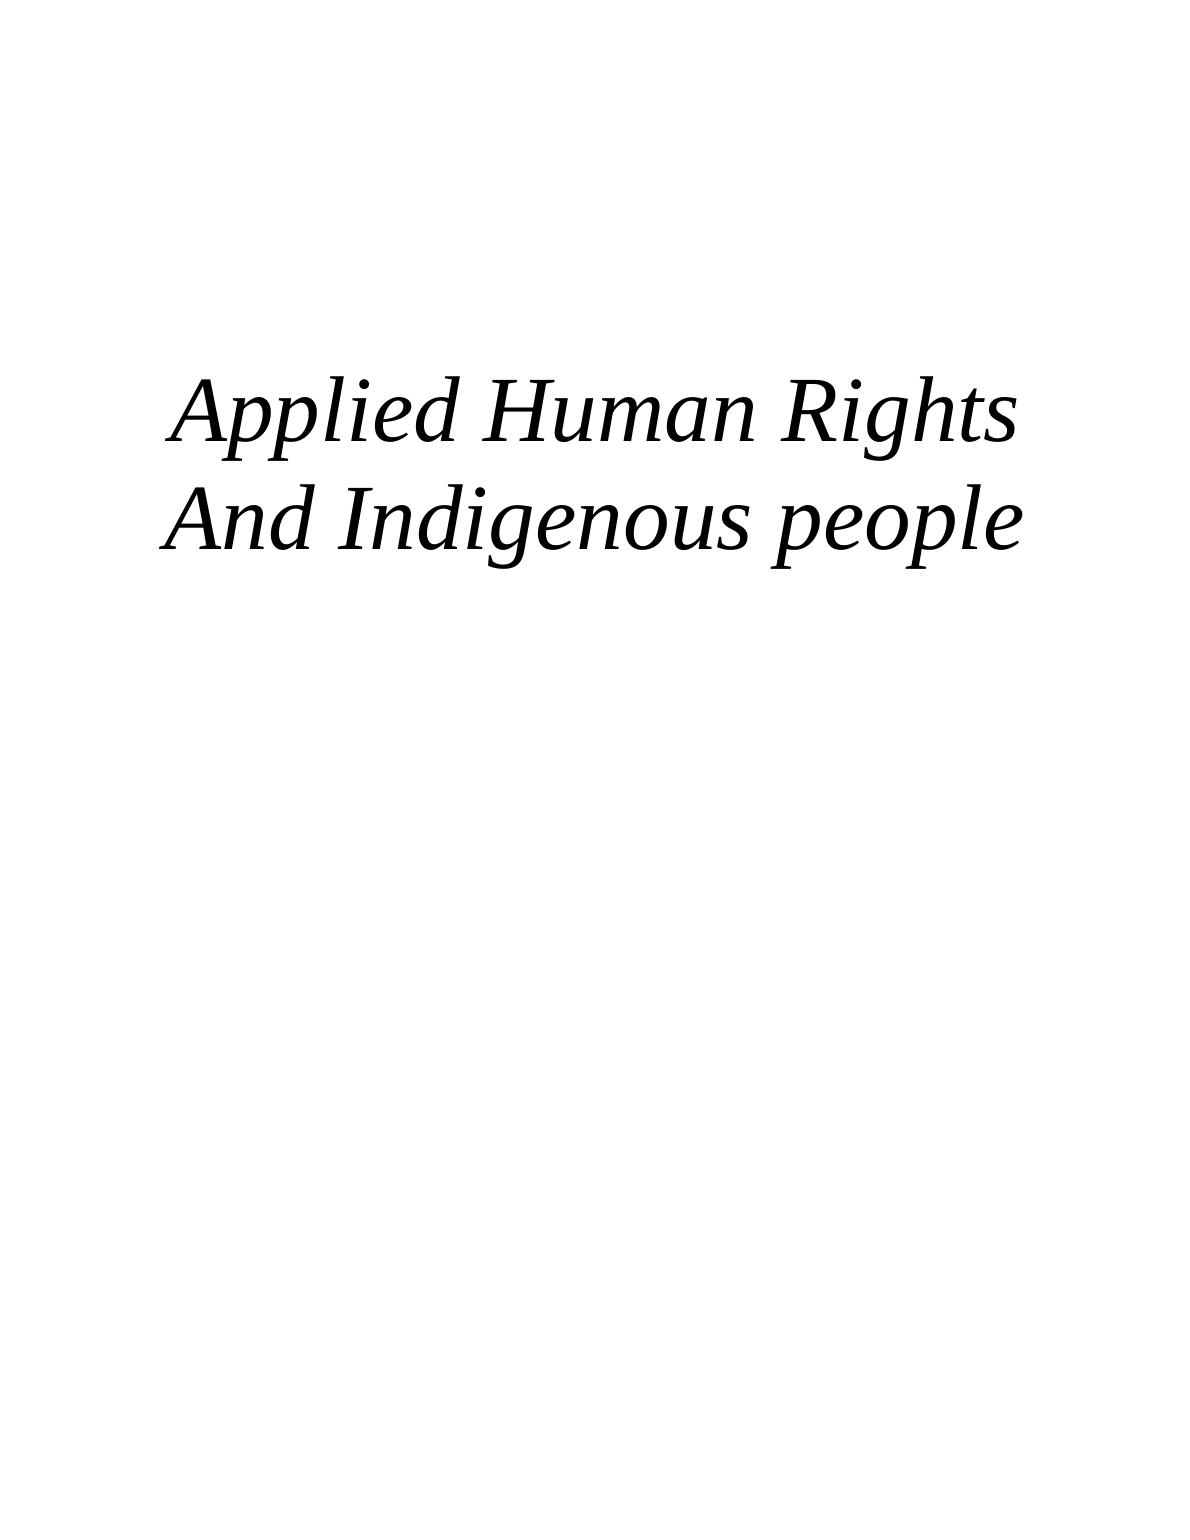 Applied Human Rights And Indigenous People - Doc_1